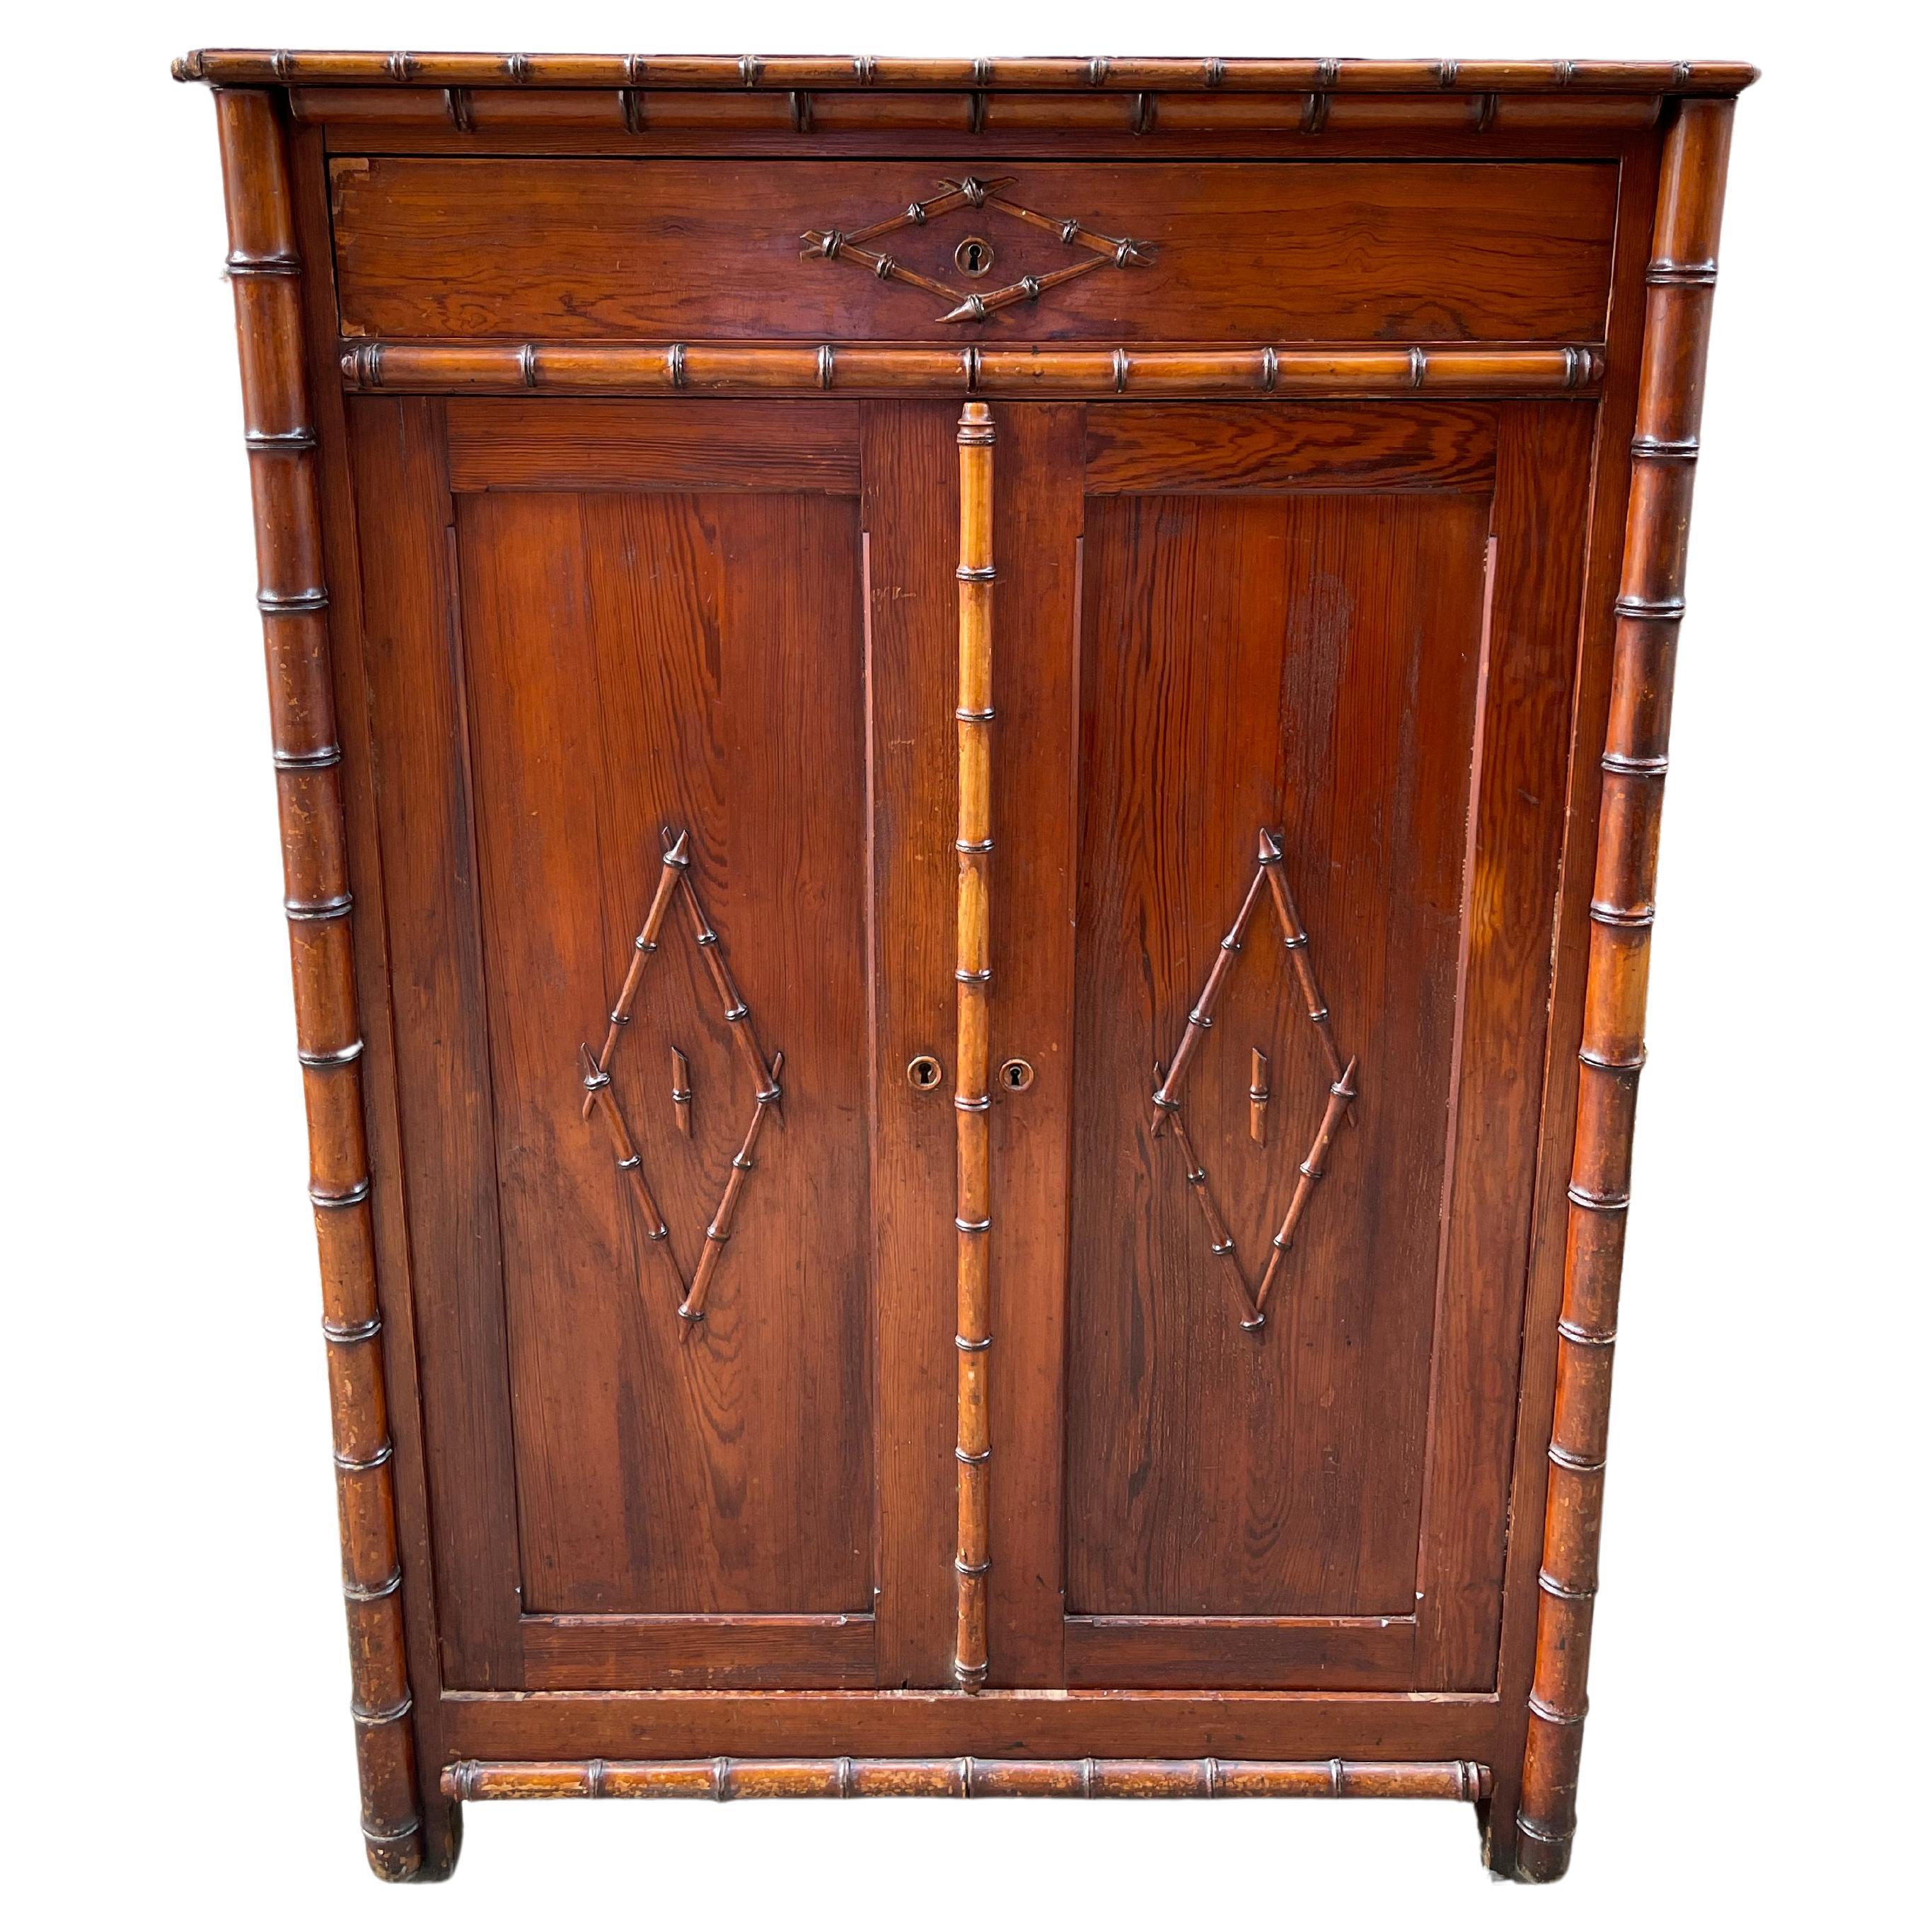 Faux Bamboo Pine Cupboard with Drawer over 2 Doors, Early 20th Century